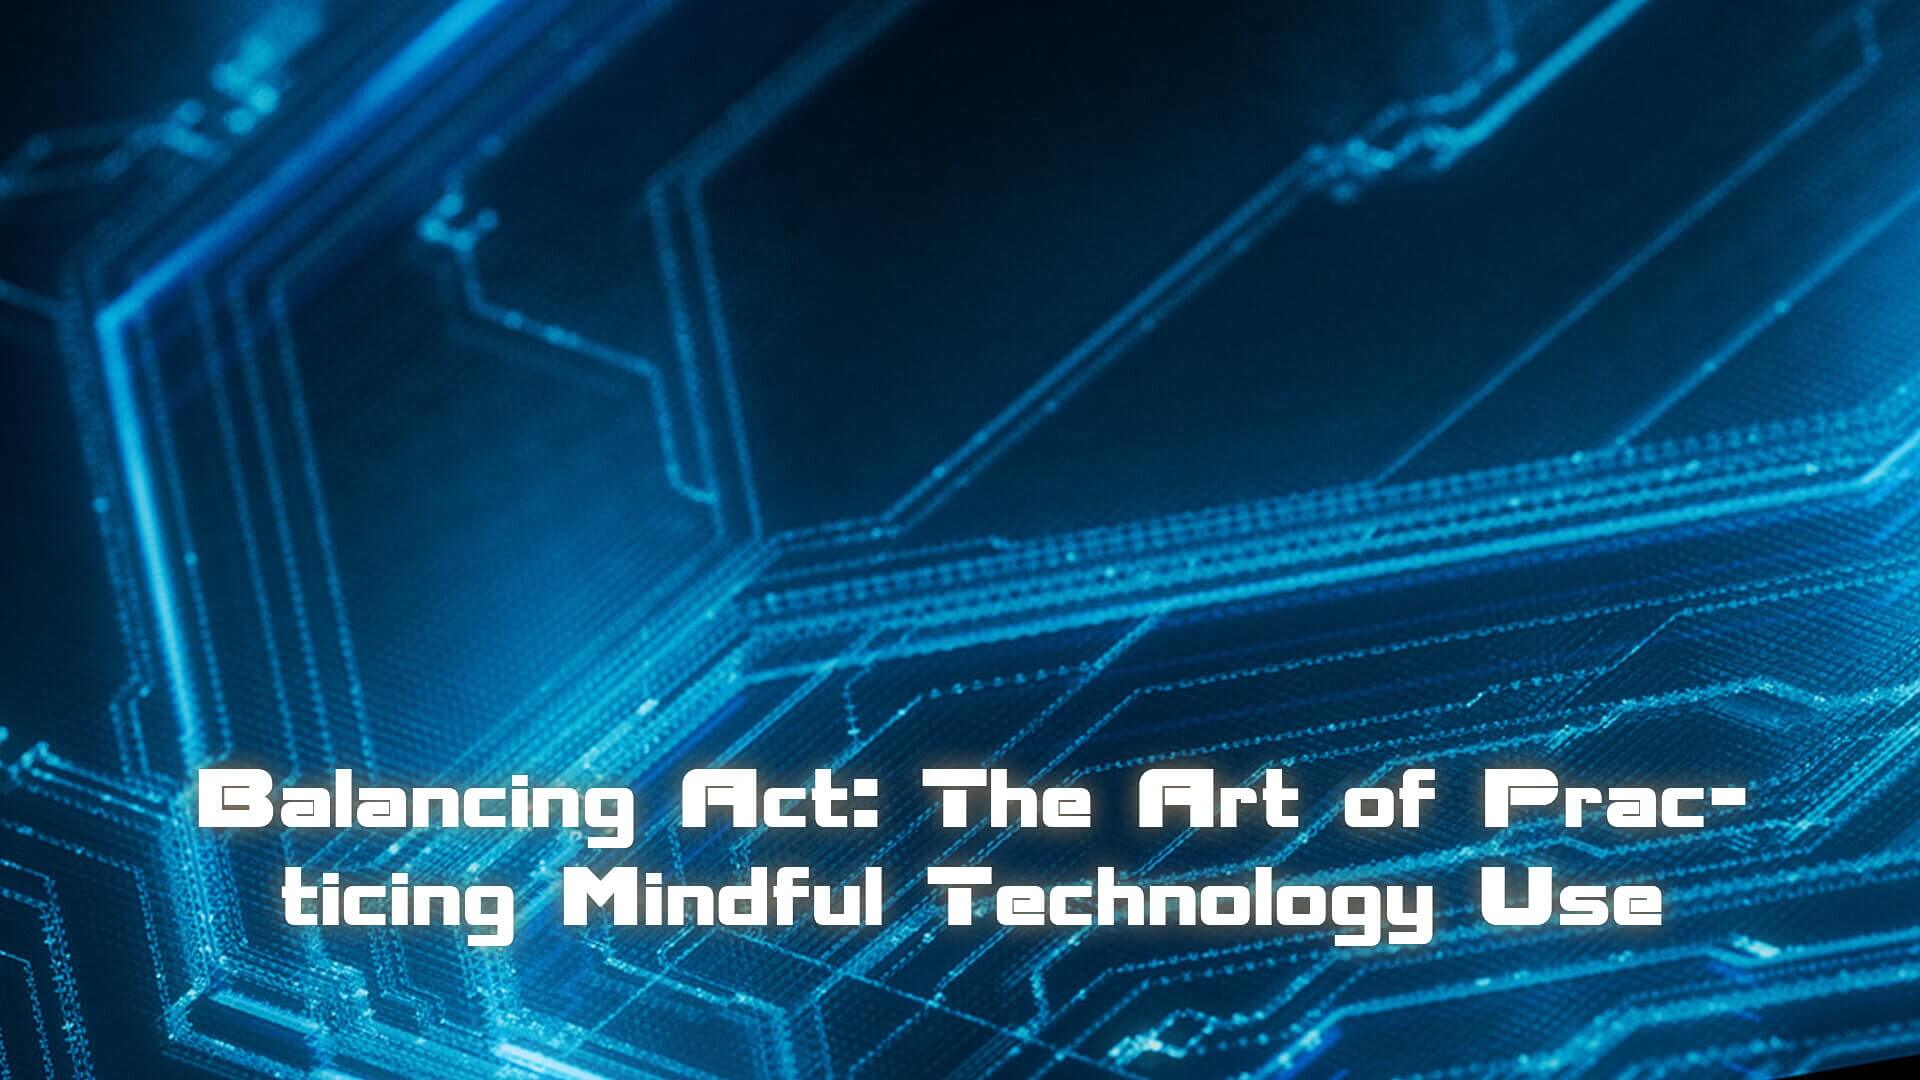 Balancing Act: The Art of Practicing Mindful Technology Use